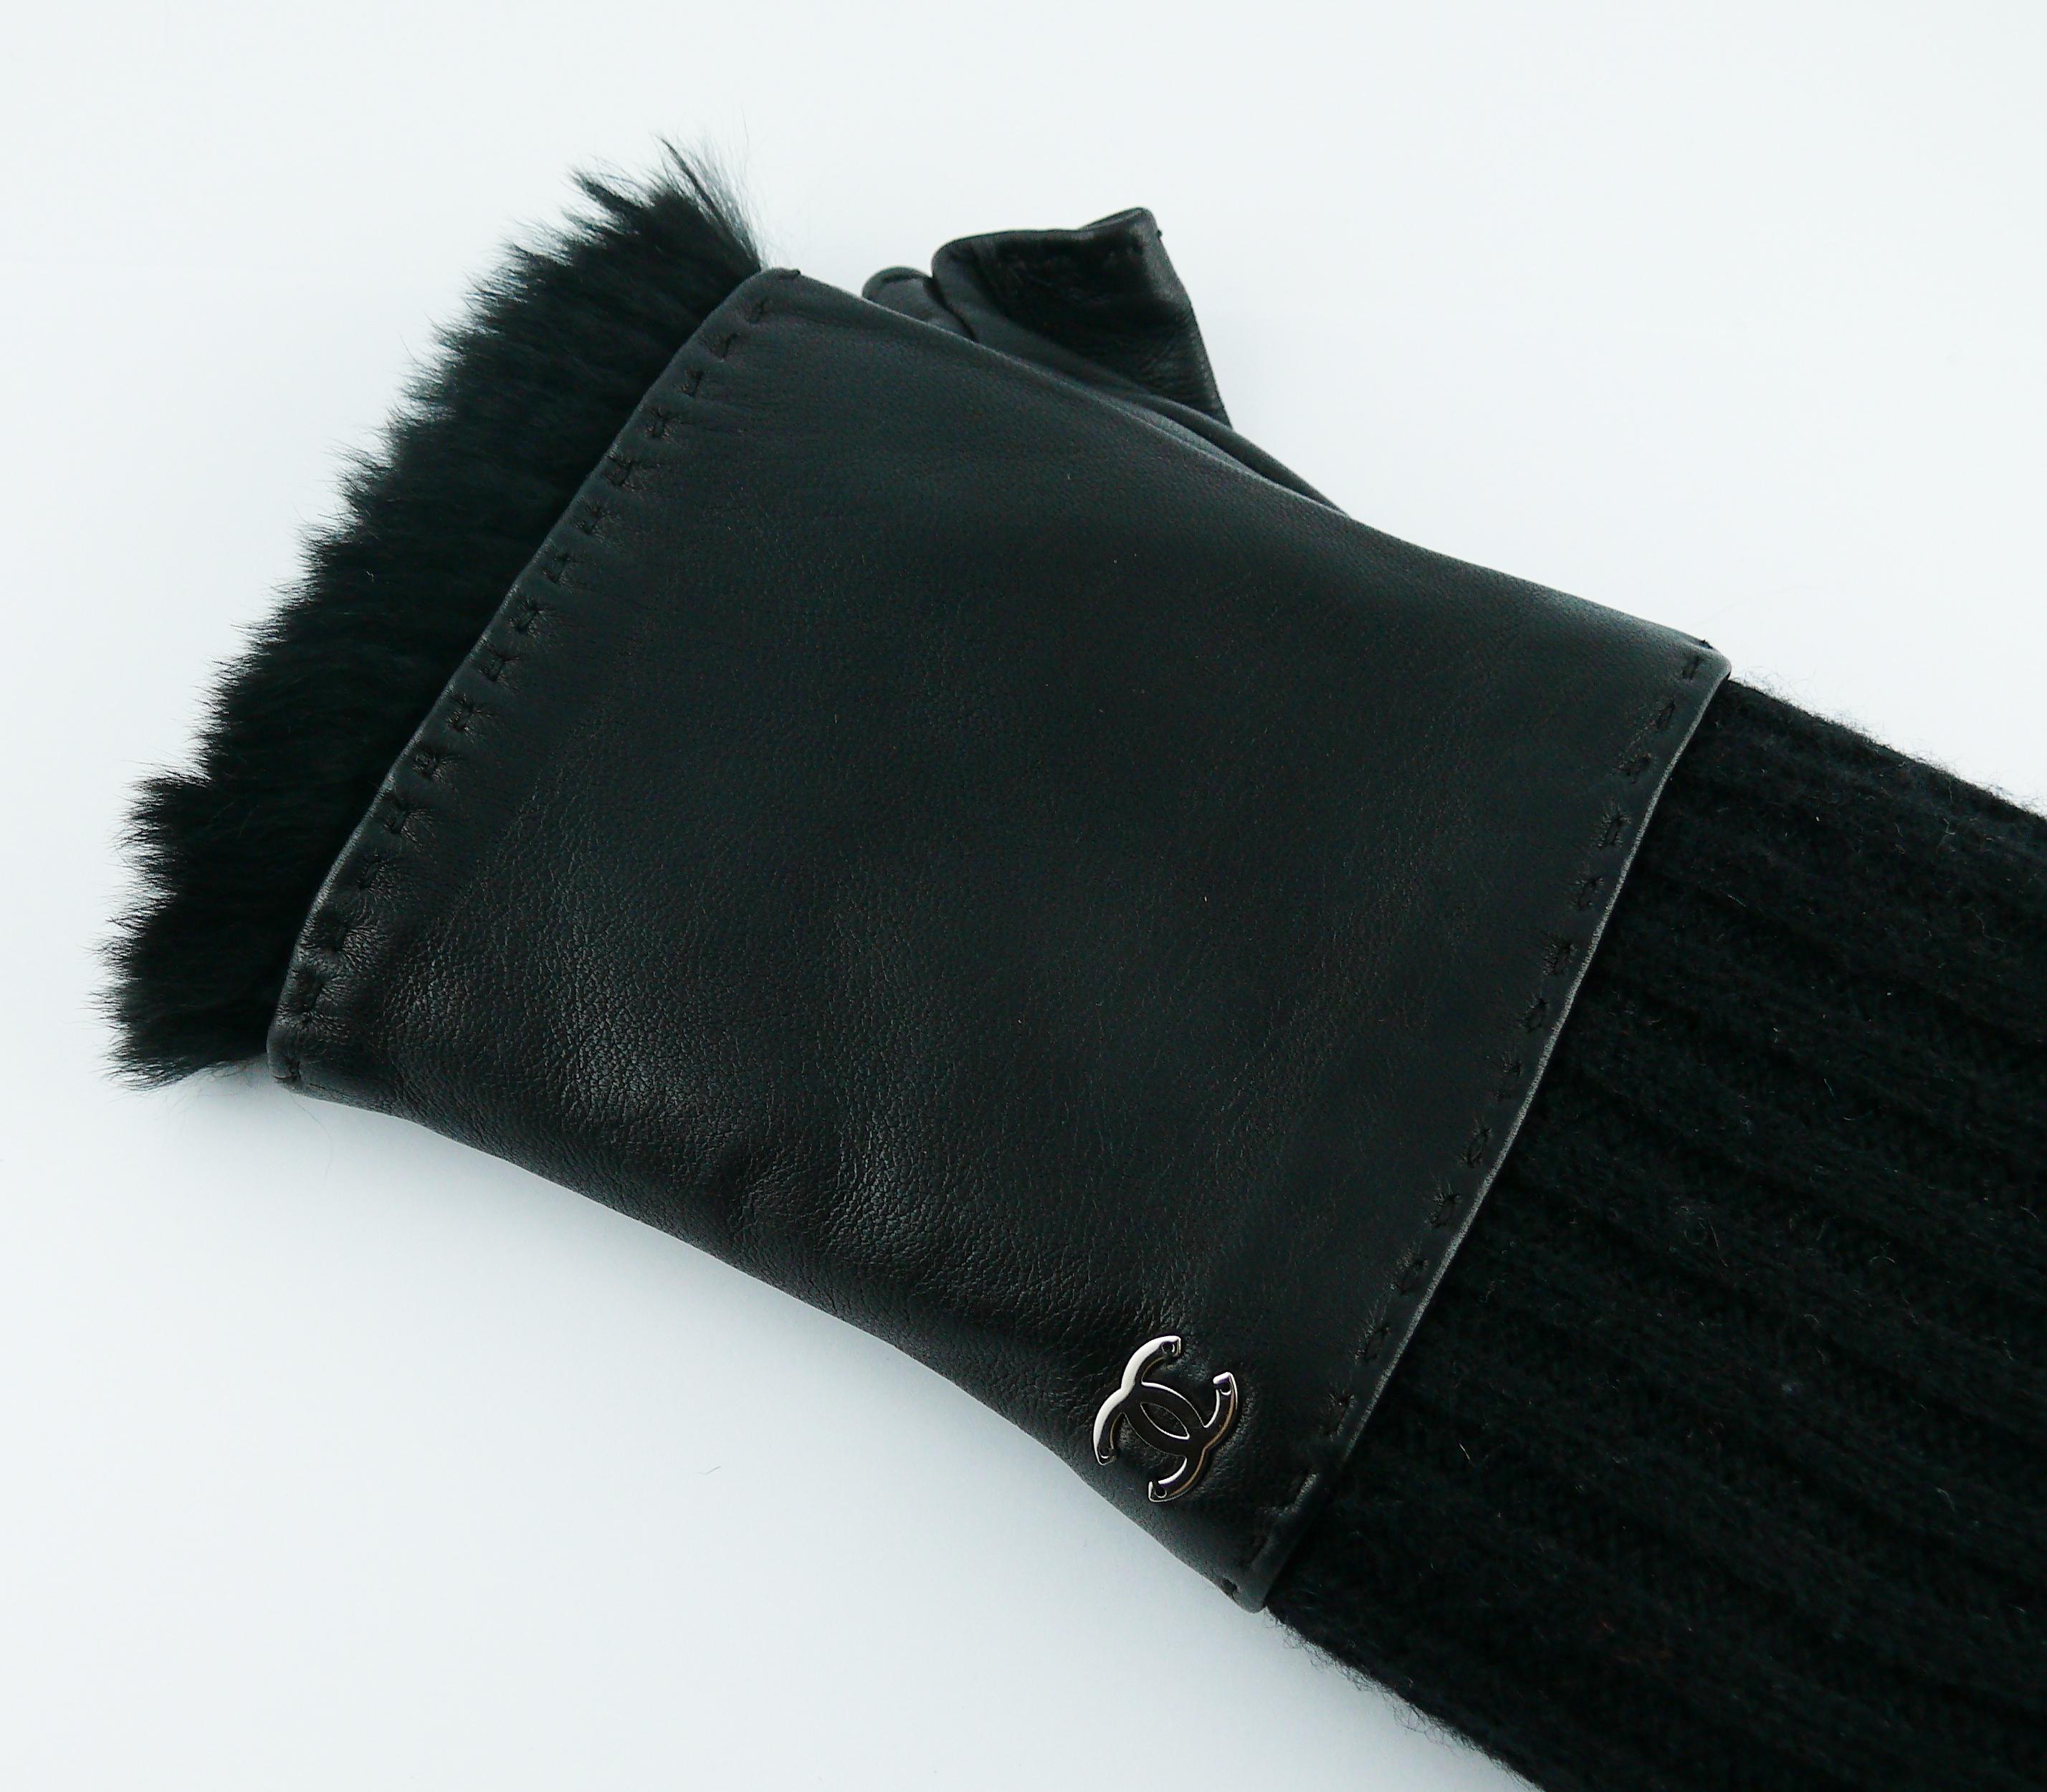 CHANEL black lambskin and wool fingerless gloves with Orylag rabbit fur trim and silver toned CC logos.

Label reads CHANEL Made in France.

Size label reads : 7.

Indicative measurements : length approx. 24 cm (9.45 inches).

NOTES
- This is a